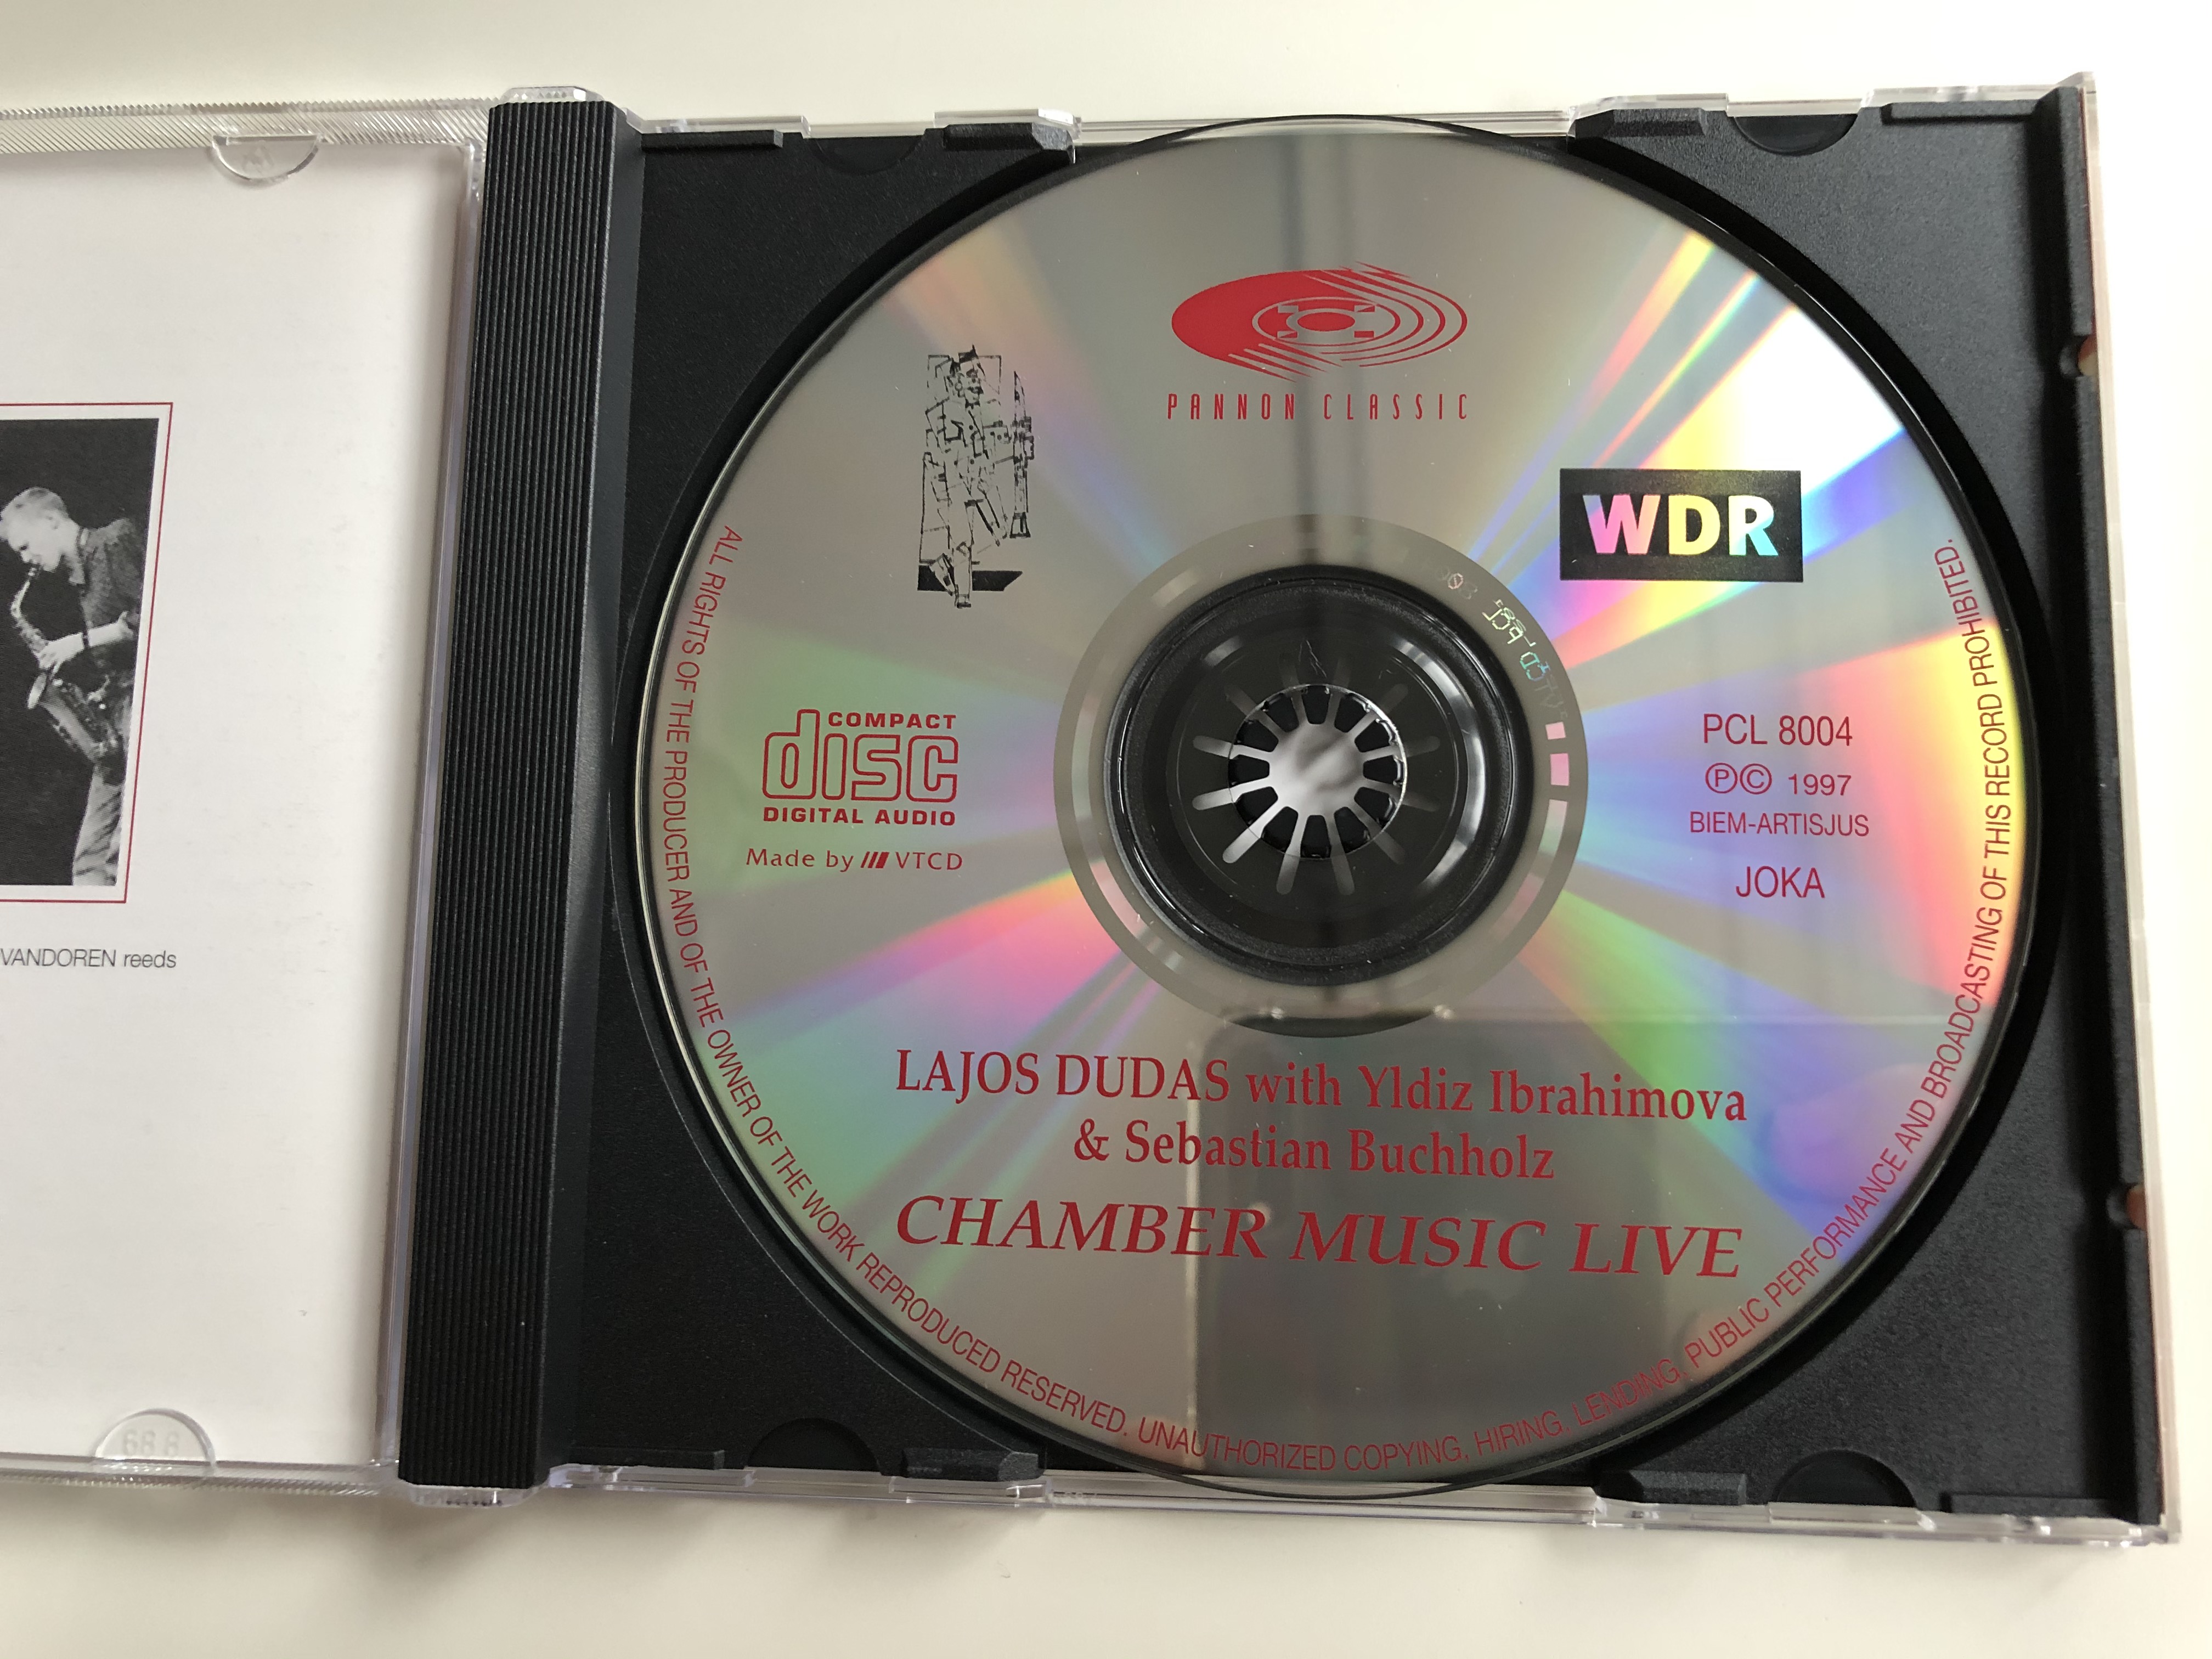 lajos-dudas-chamber-music-live-foundation-for-jazz-education-and-research-in-hungary-presents-world-premier-recording-pannon-classic-audio-cd-1997-pcl-8004-5-.jpg